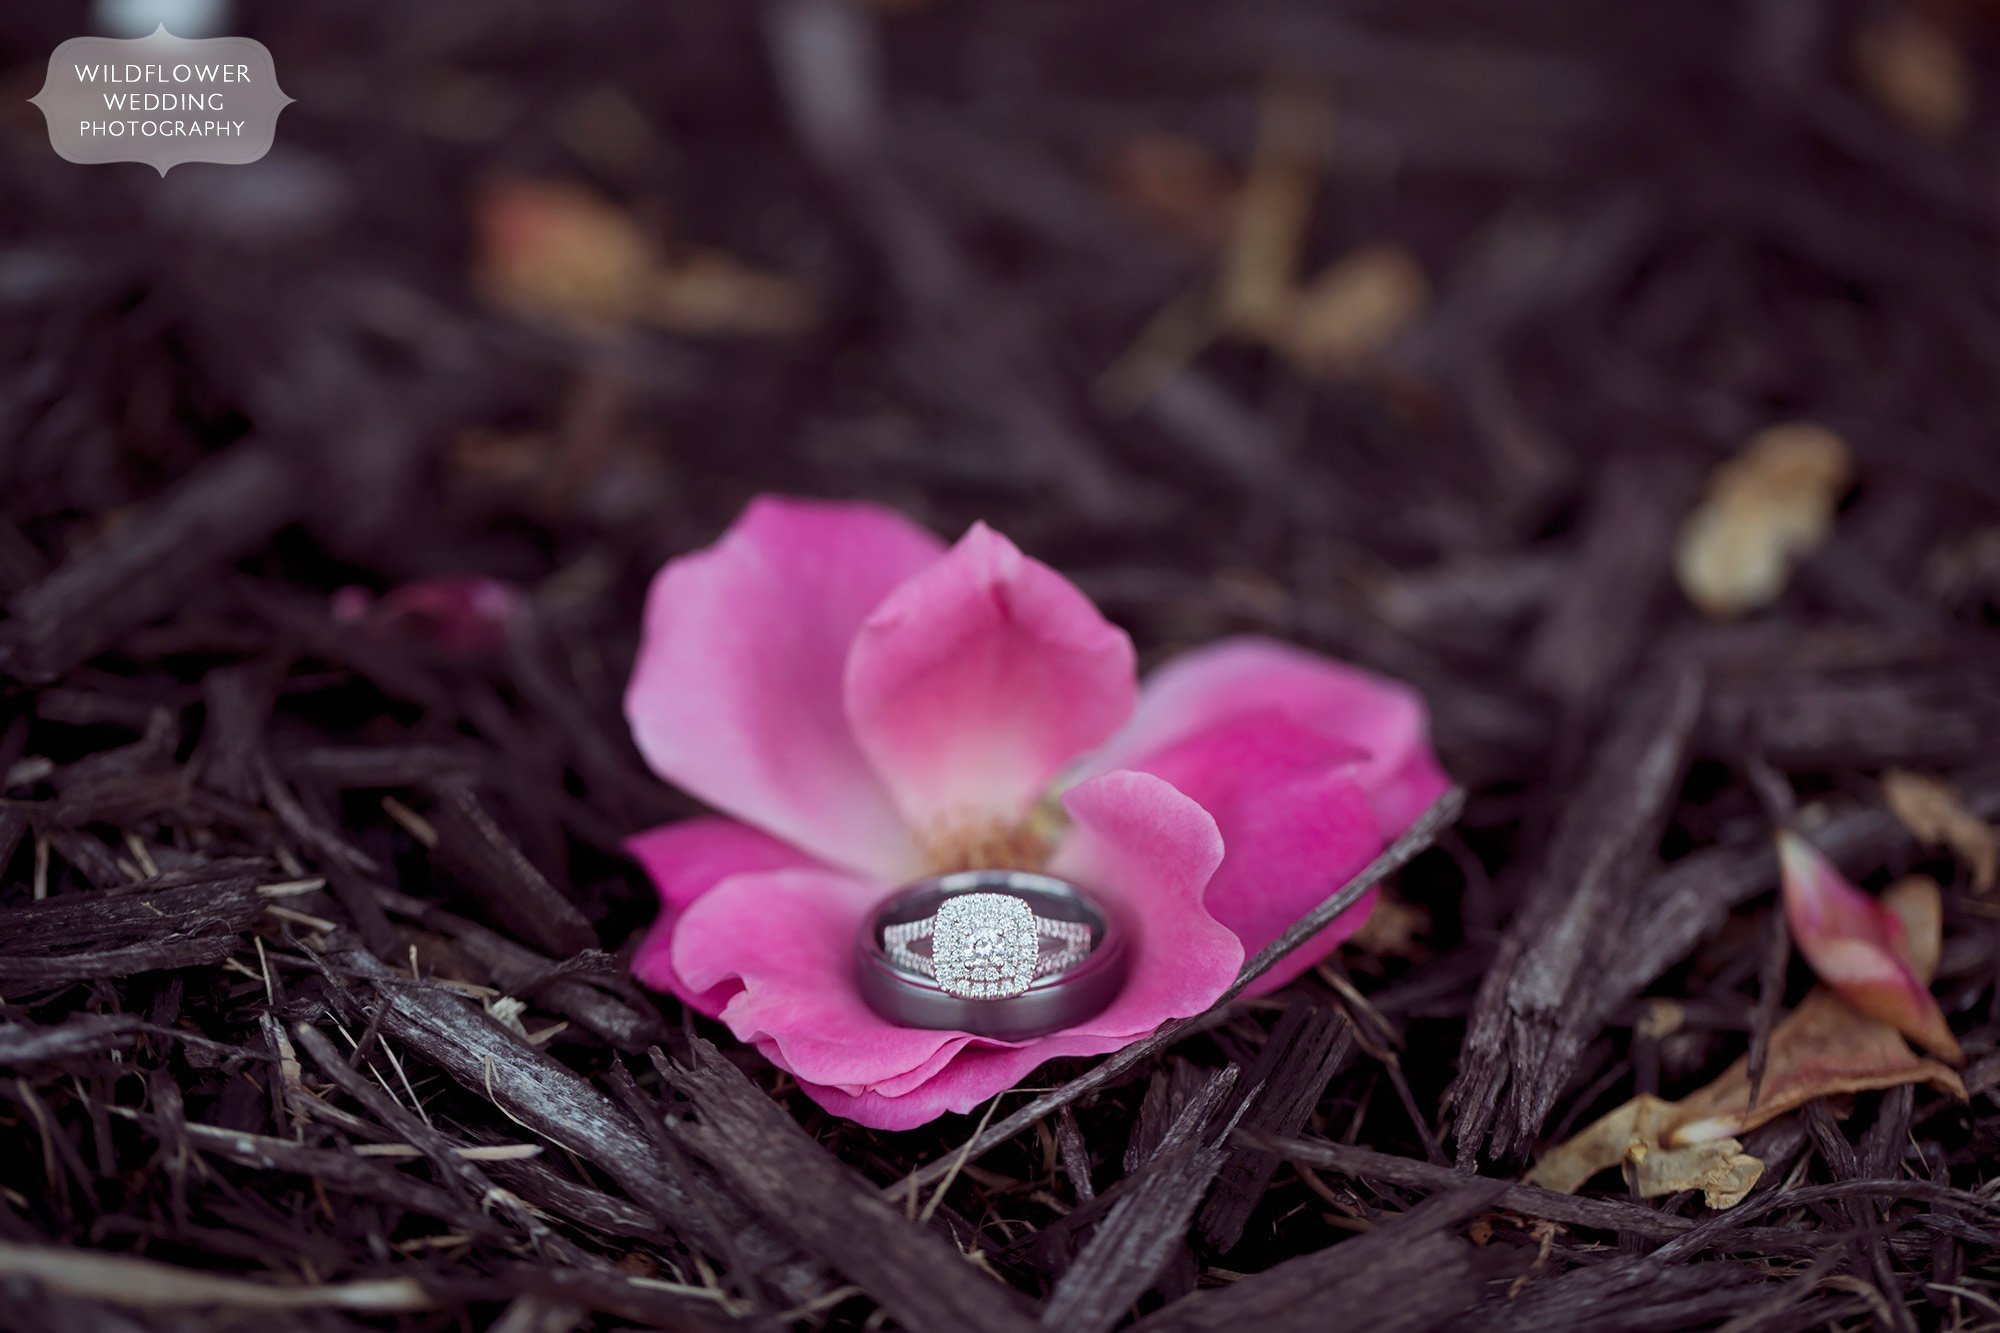 Wedding rings in a pink rose petals at the Jeff City Country Club in MO.